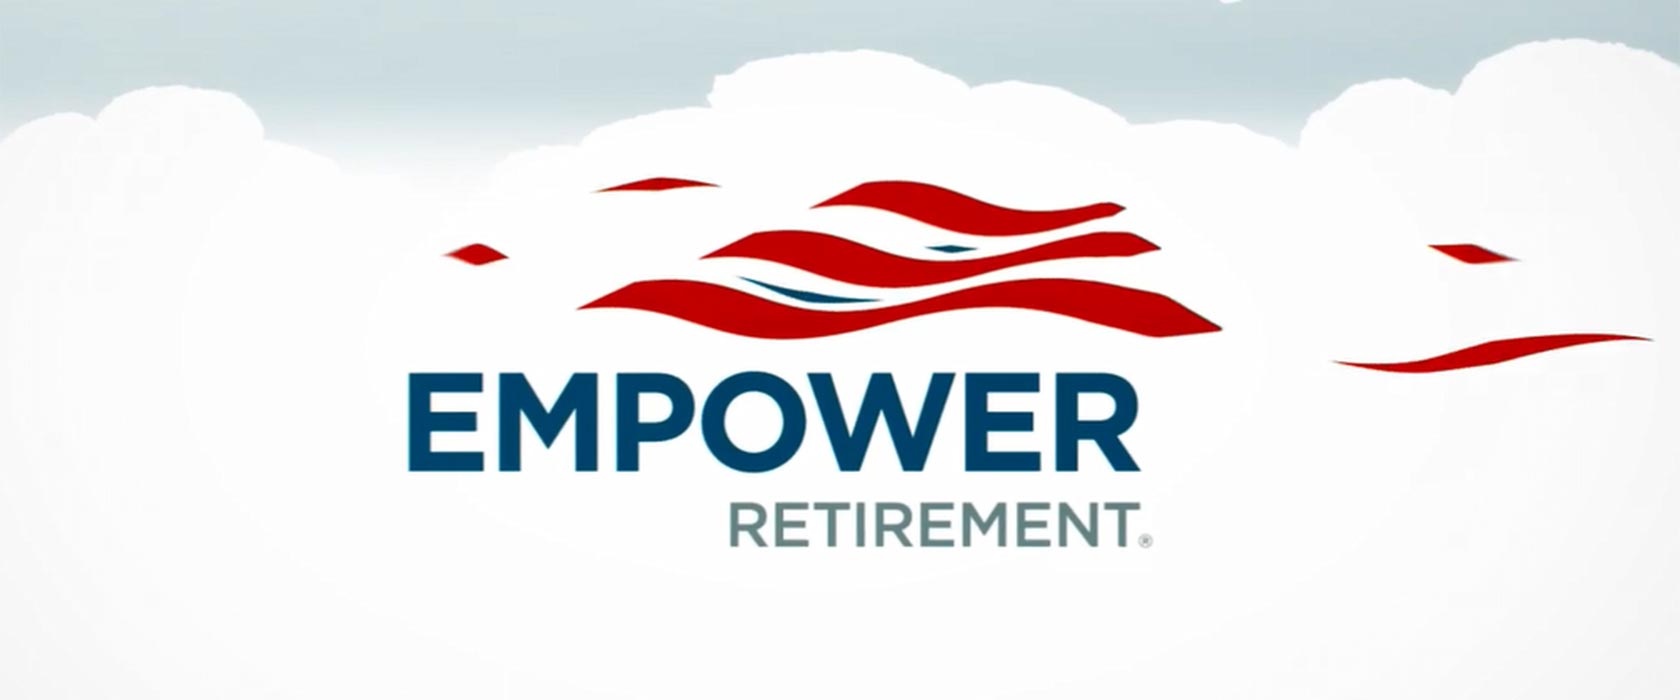 Empower Retirement National Ad Campaign For Retirement Savings